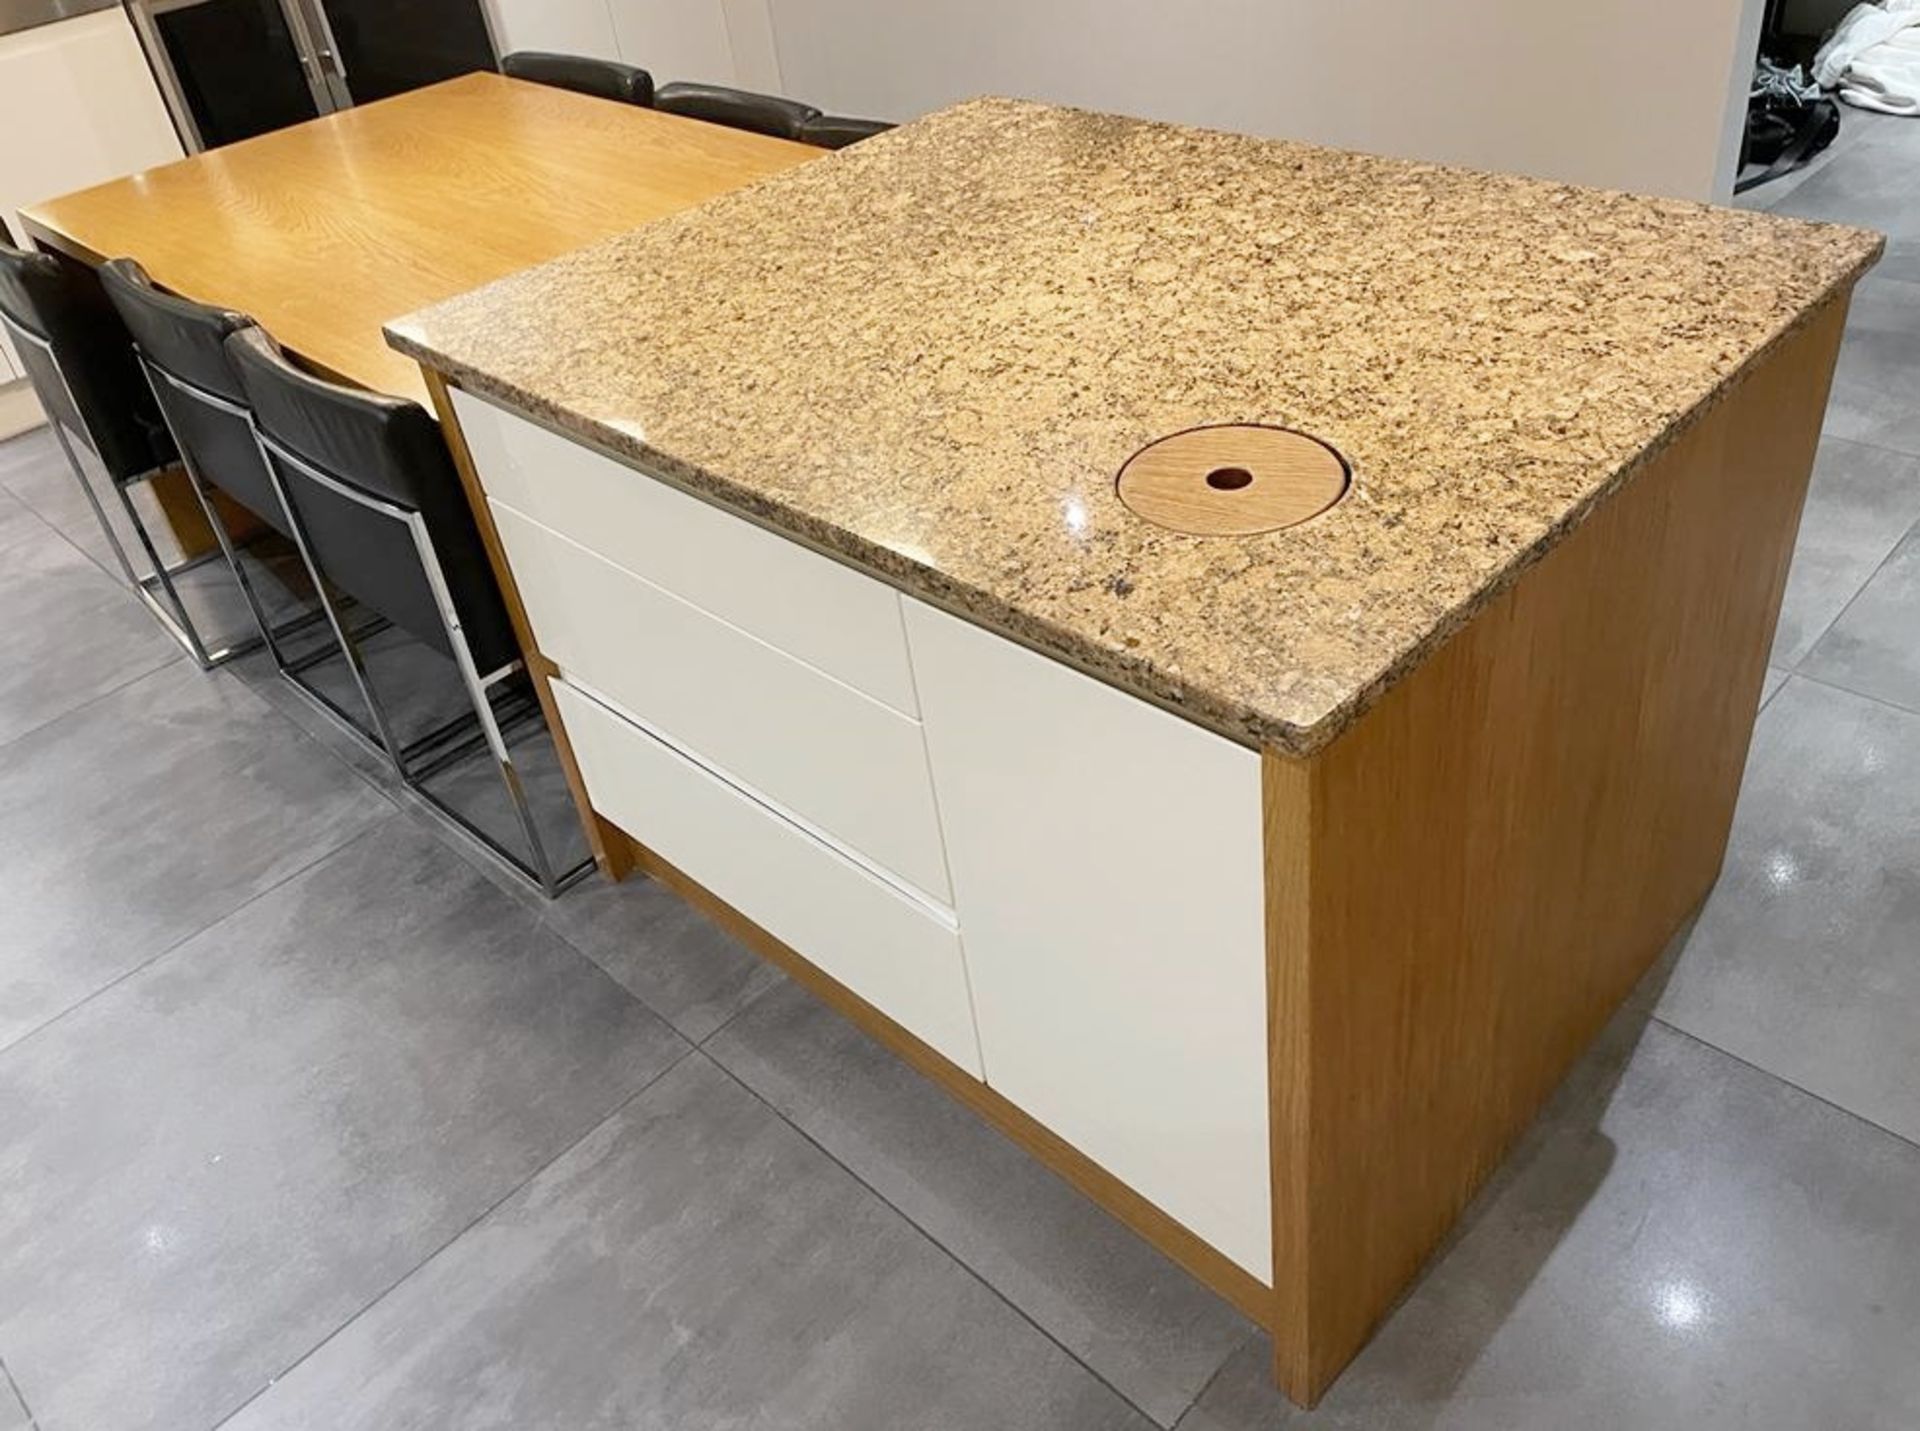 1 x Stunning PARAPAN Handleless Fitted Kitchen with Neff Appliances, Granite Worktops & Island - Image 42 of 126